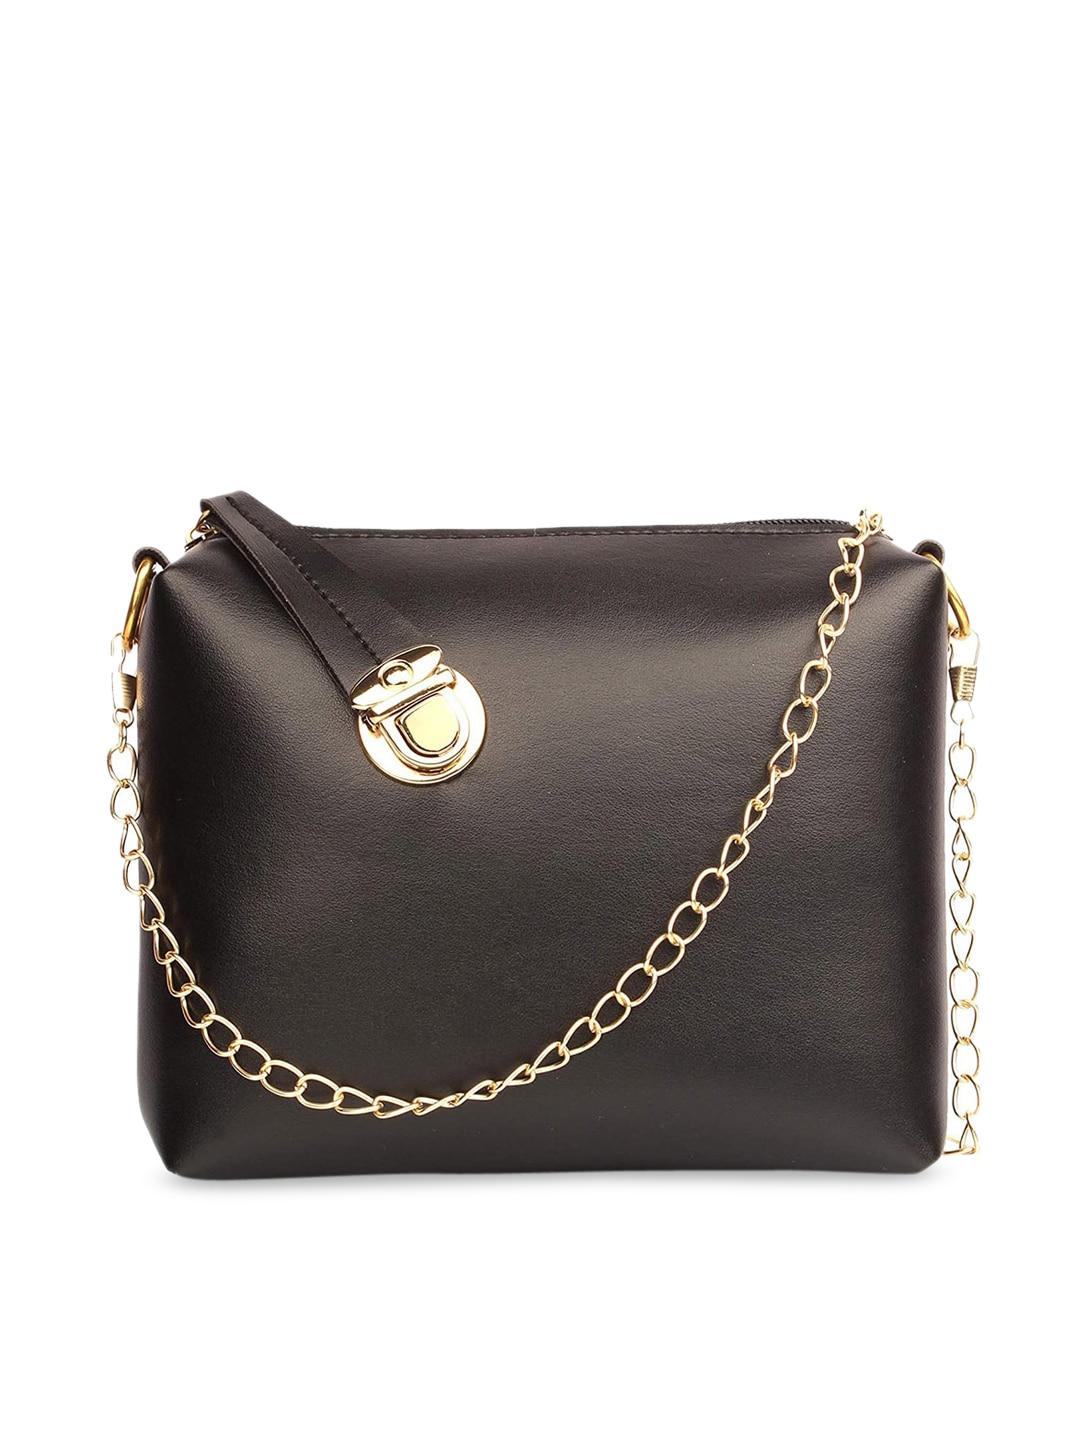 Style SHOES Black PU Structured Sling Bag